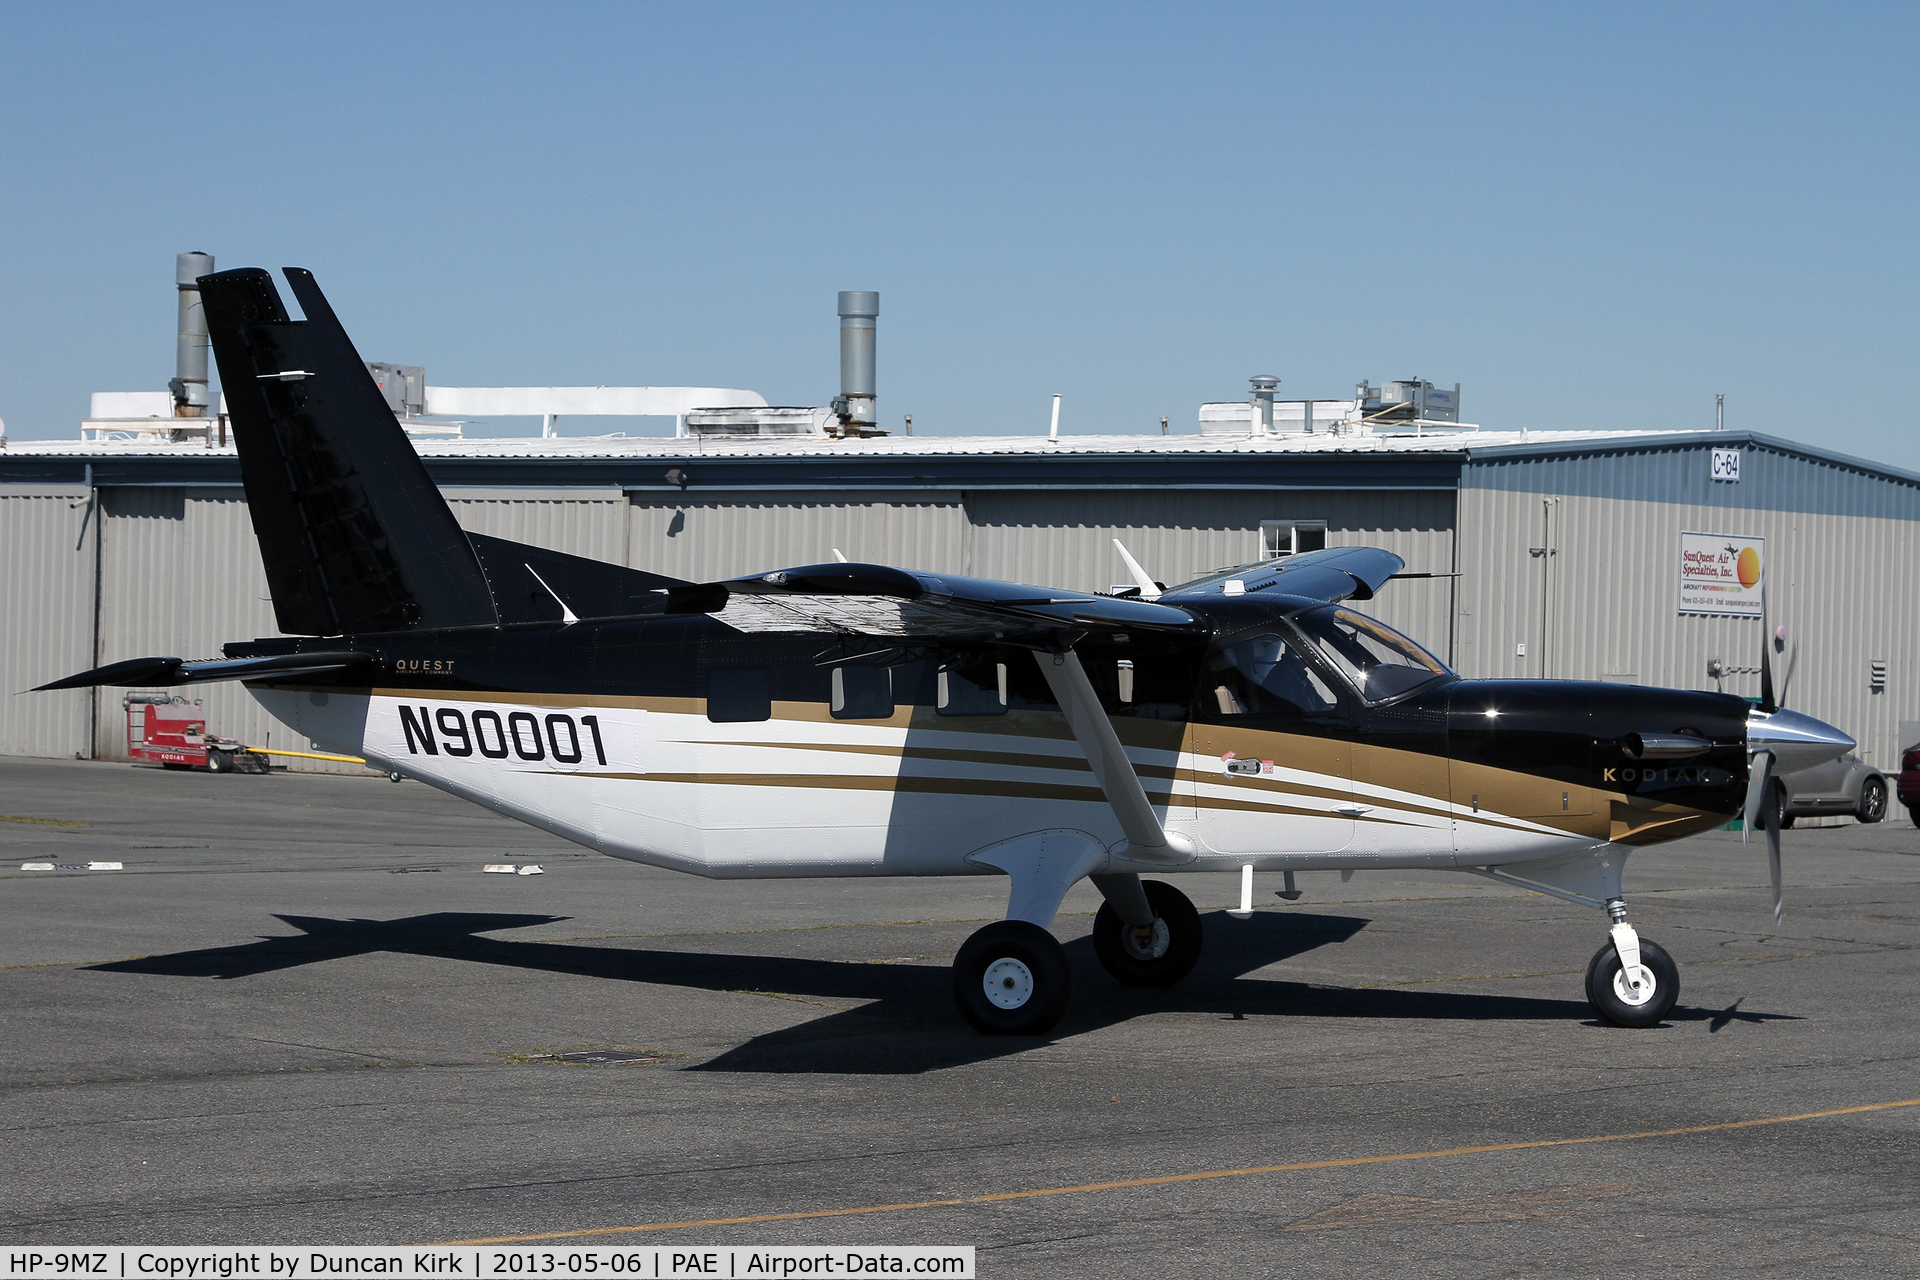 HP-9MZ, 2013 Quest Kodiak 100 C/N 100-0091, Returning to Idaho from the Sunquest paint shop at PAE wearing ferry reg N90001